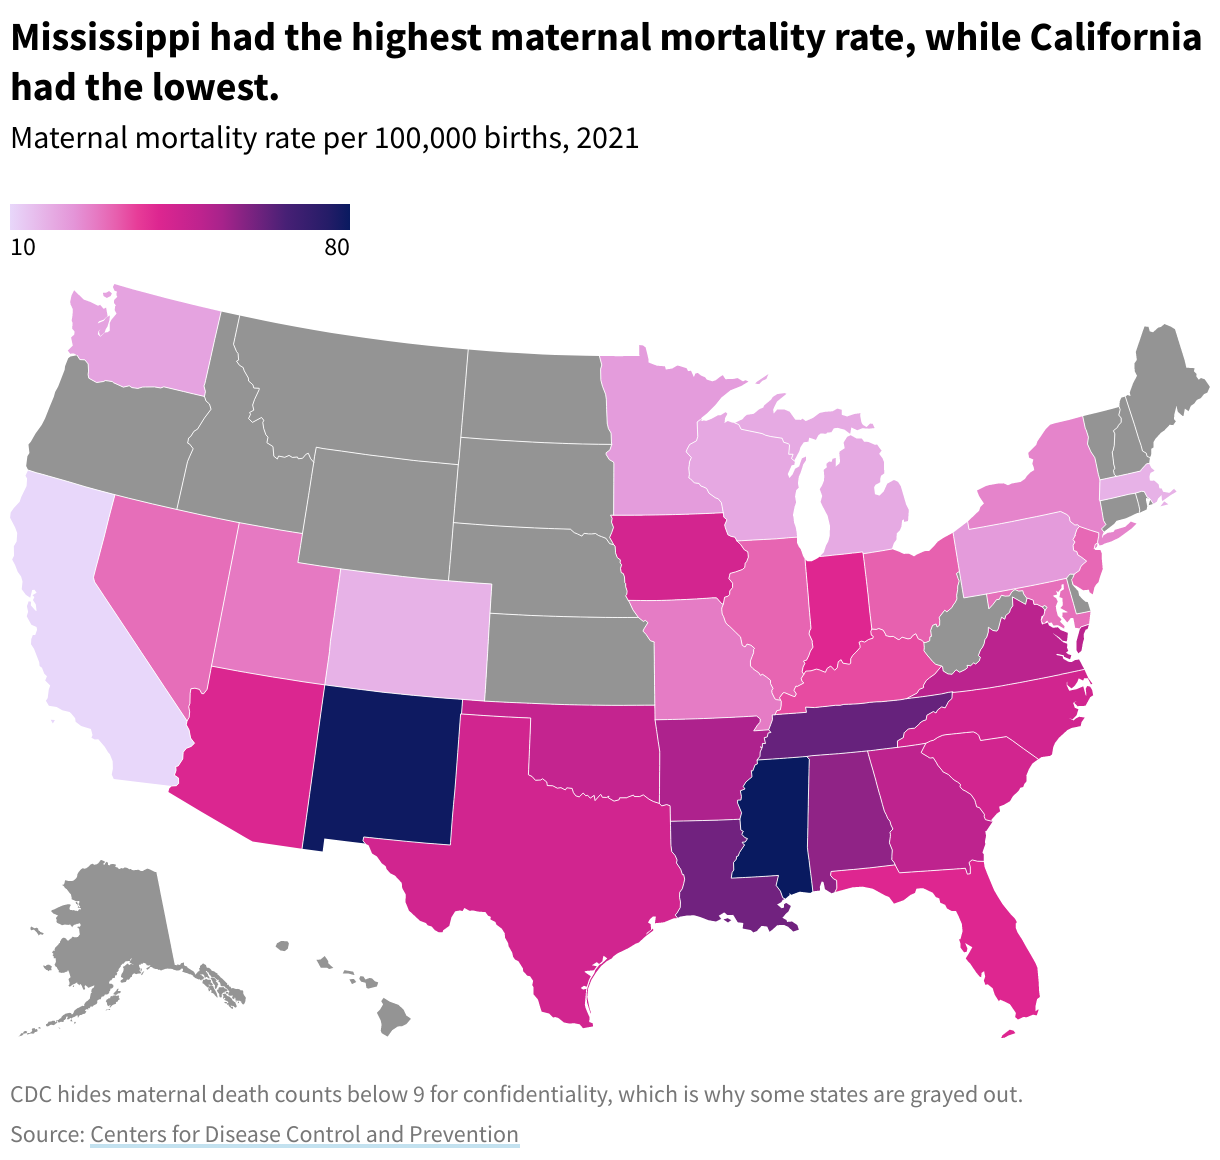 A state map that ranges from light pink to dark blue, where light pink states have the lowest maternal mortality rates and dark blue states have the highest maternal mortality rates. Some of the lightest pink states are Colorado, Massachusetts, and California. Some of the darkest blue states are Mississippi, New Mexico, and Tennessee. Hovering over a state displays the state's name and the maternal mortality rate.